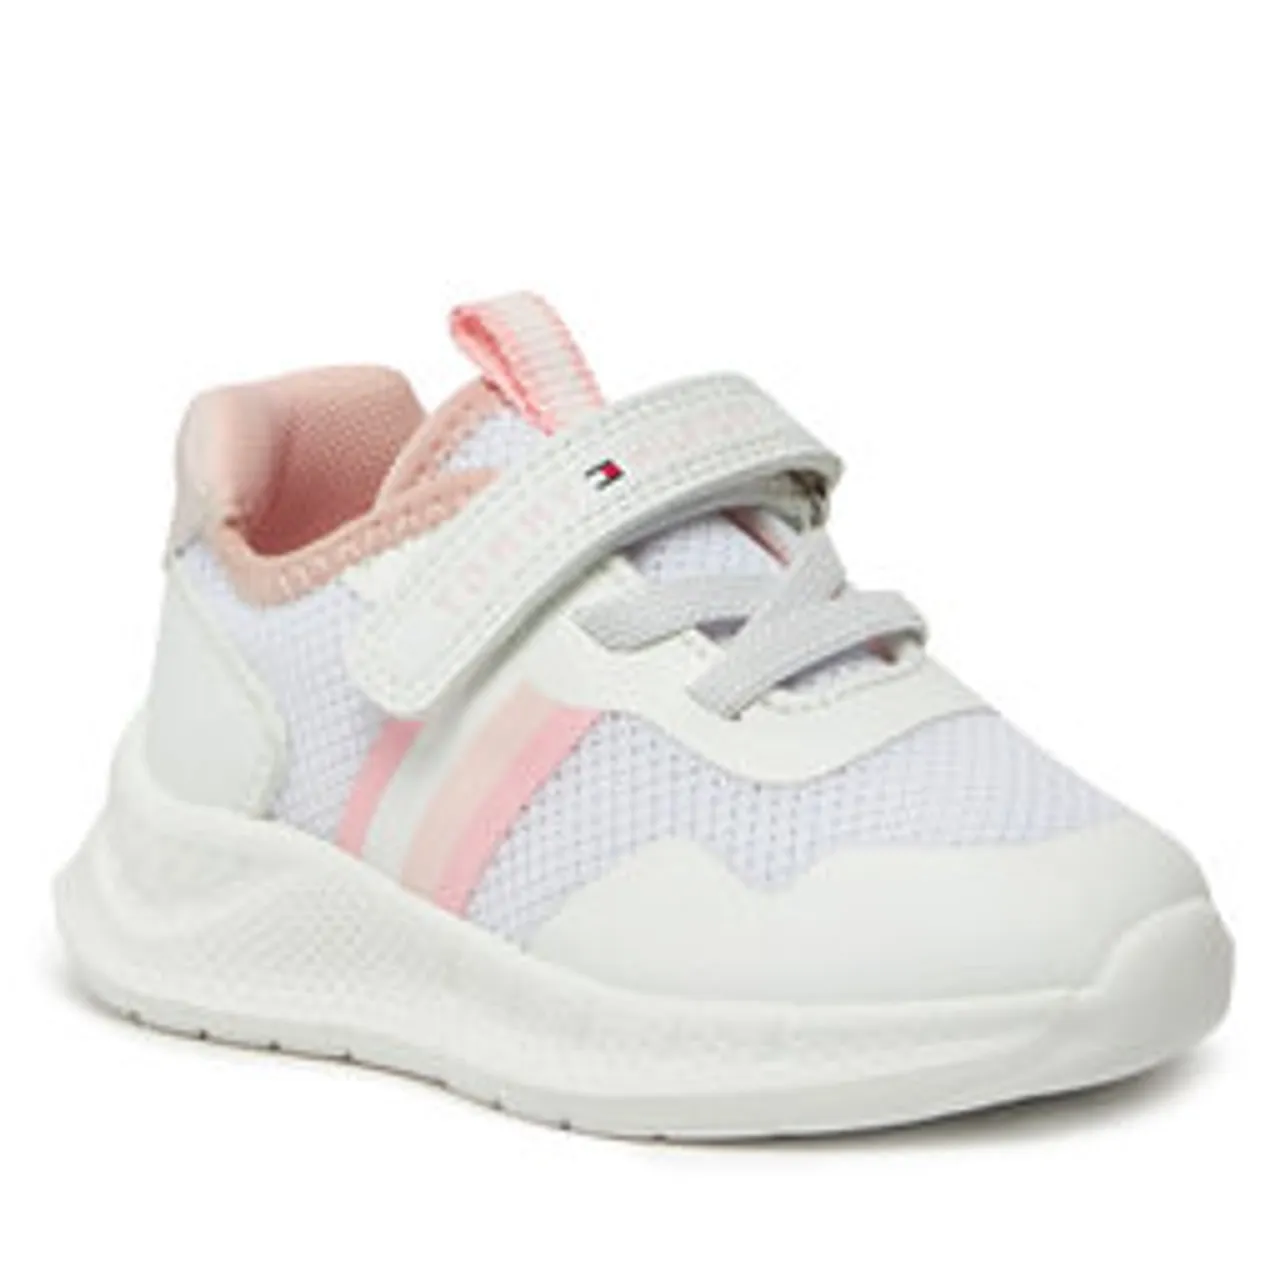 Sneakers Tommy Hilfiger Stripes Low Cut Lace-Up Velcro Sneaker T1A9-33222-1697 M White/Pink X134